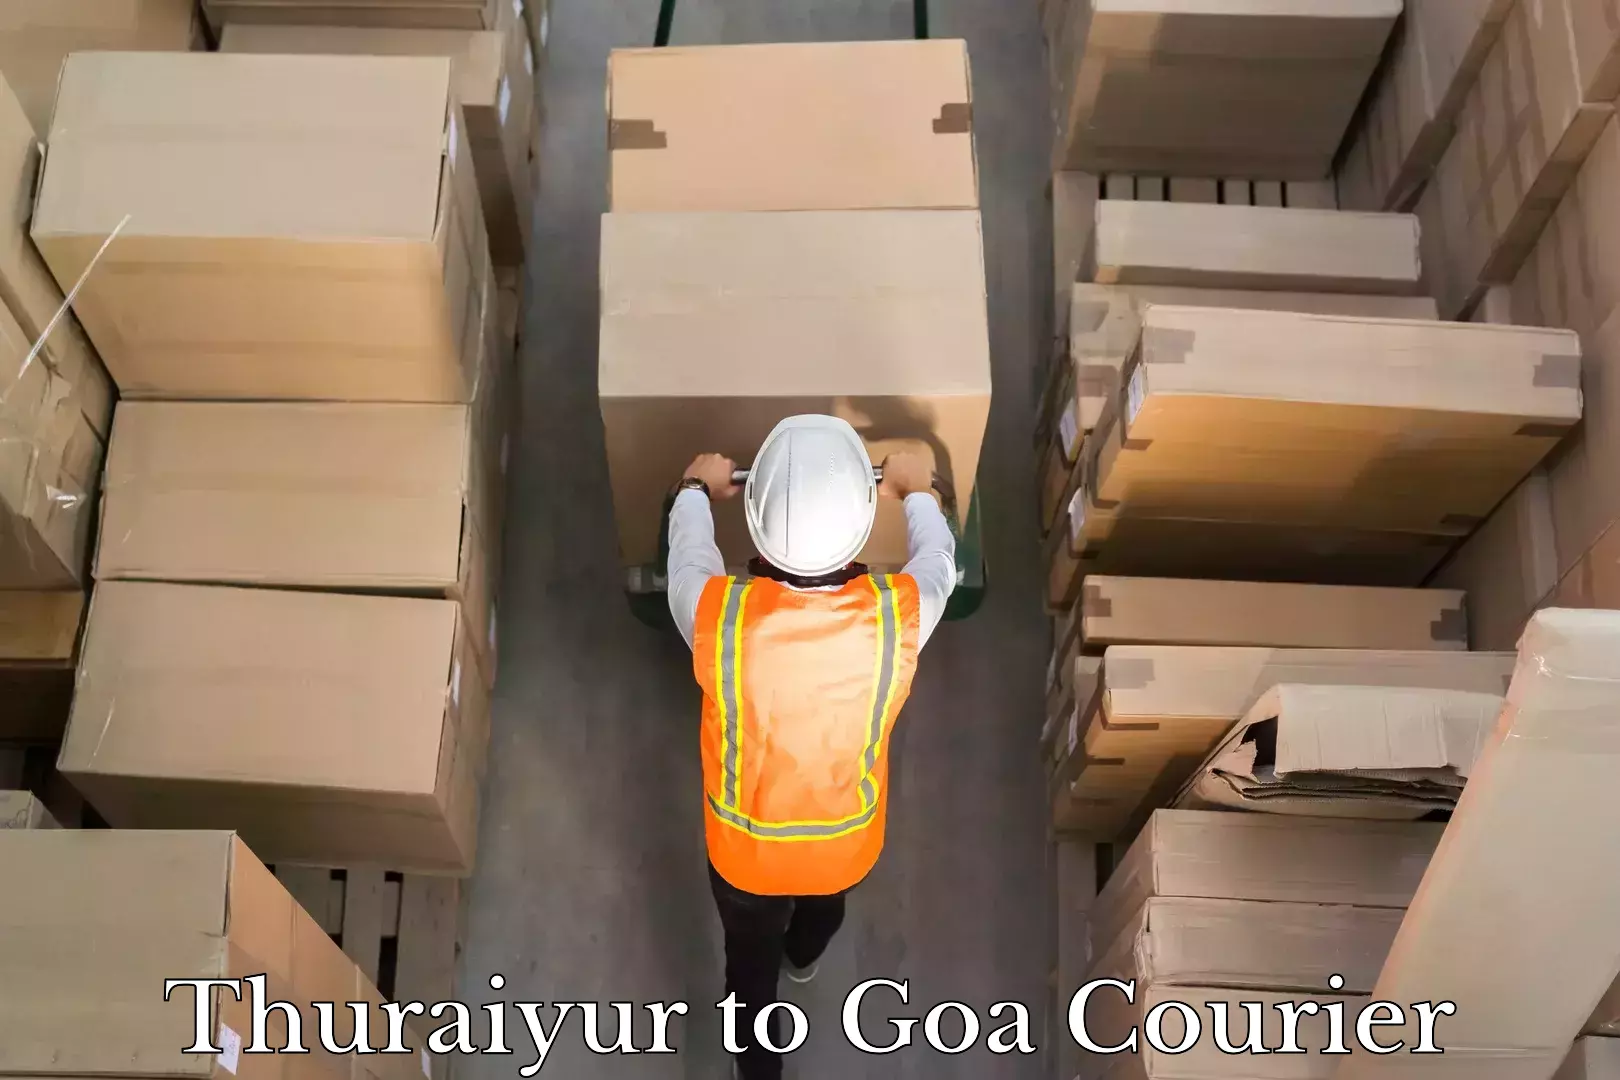 Reliable courier service in Thuraiyur to Goa